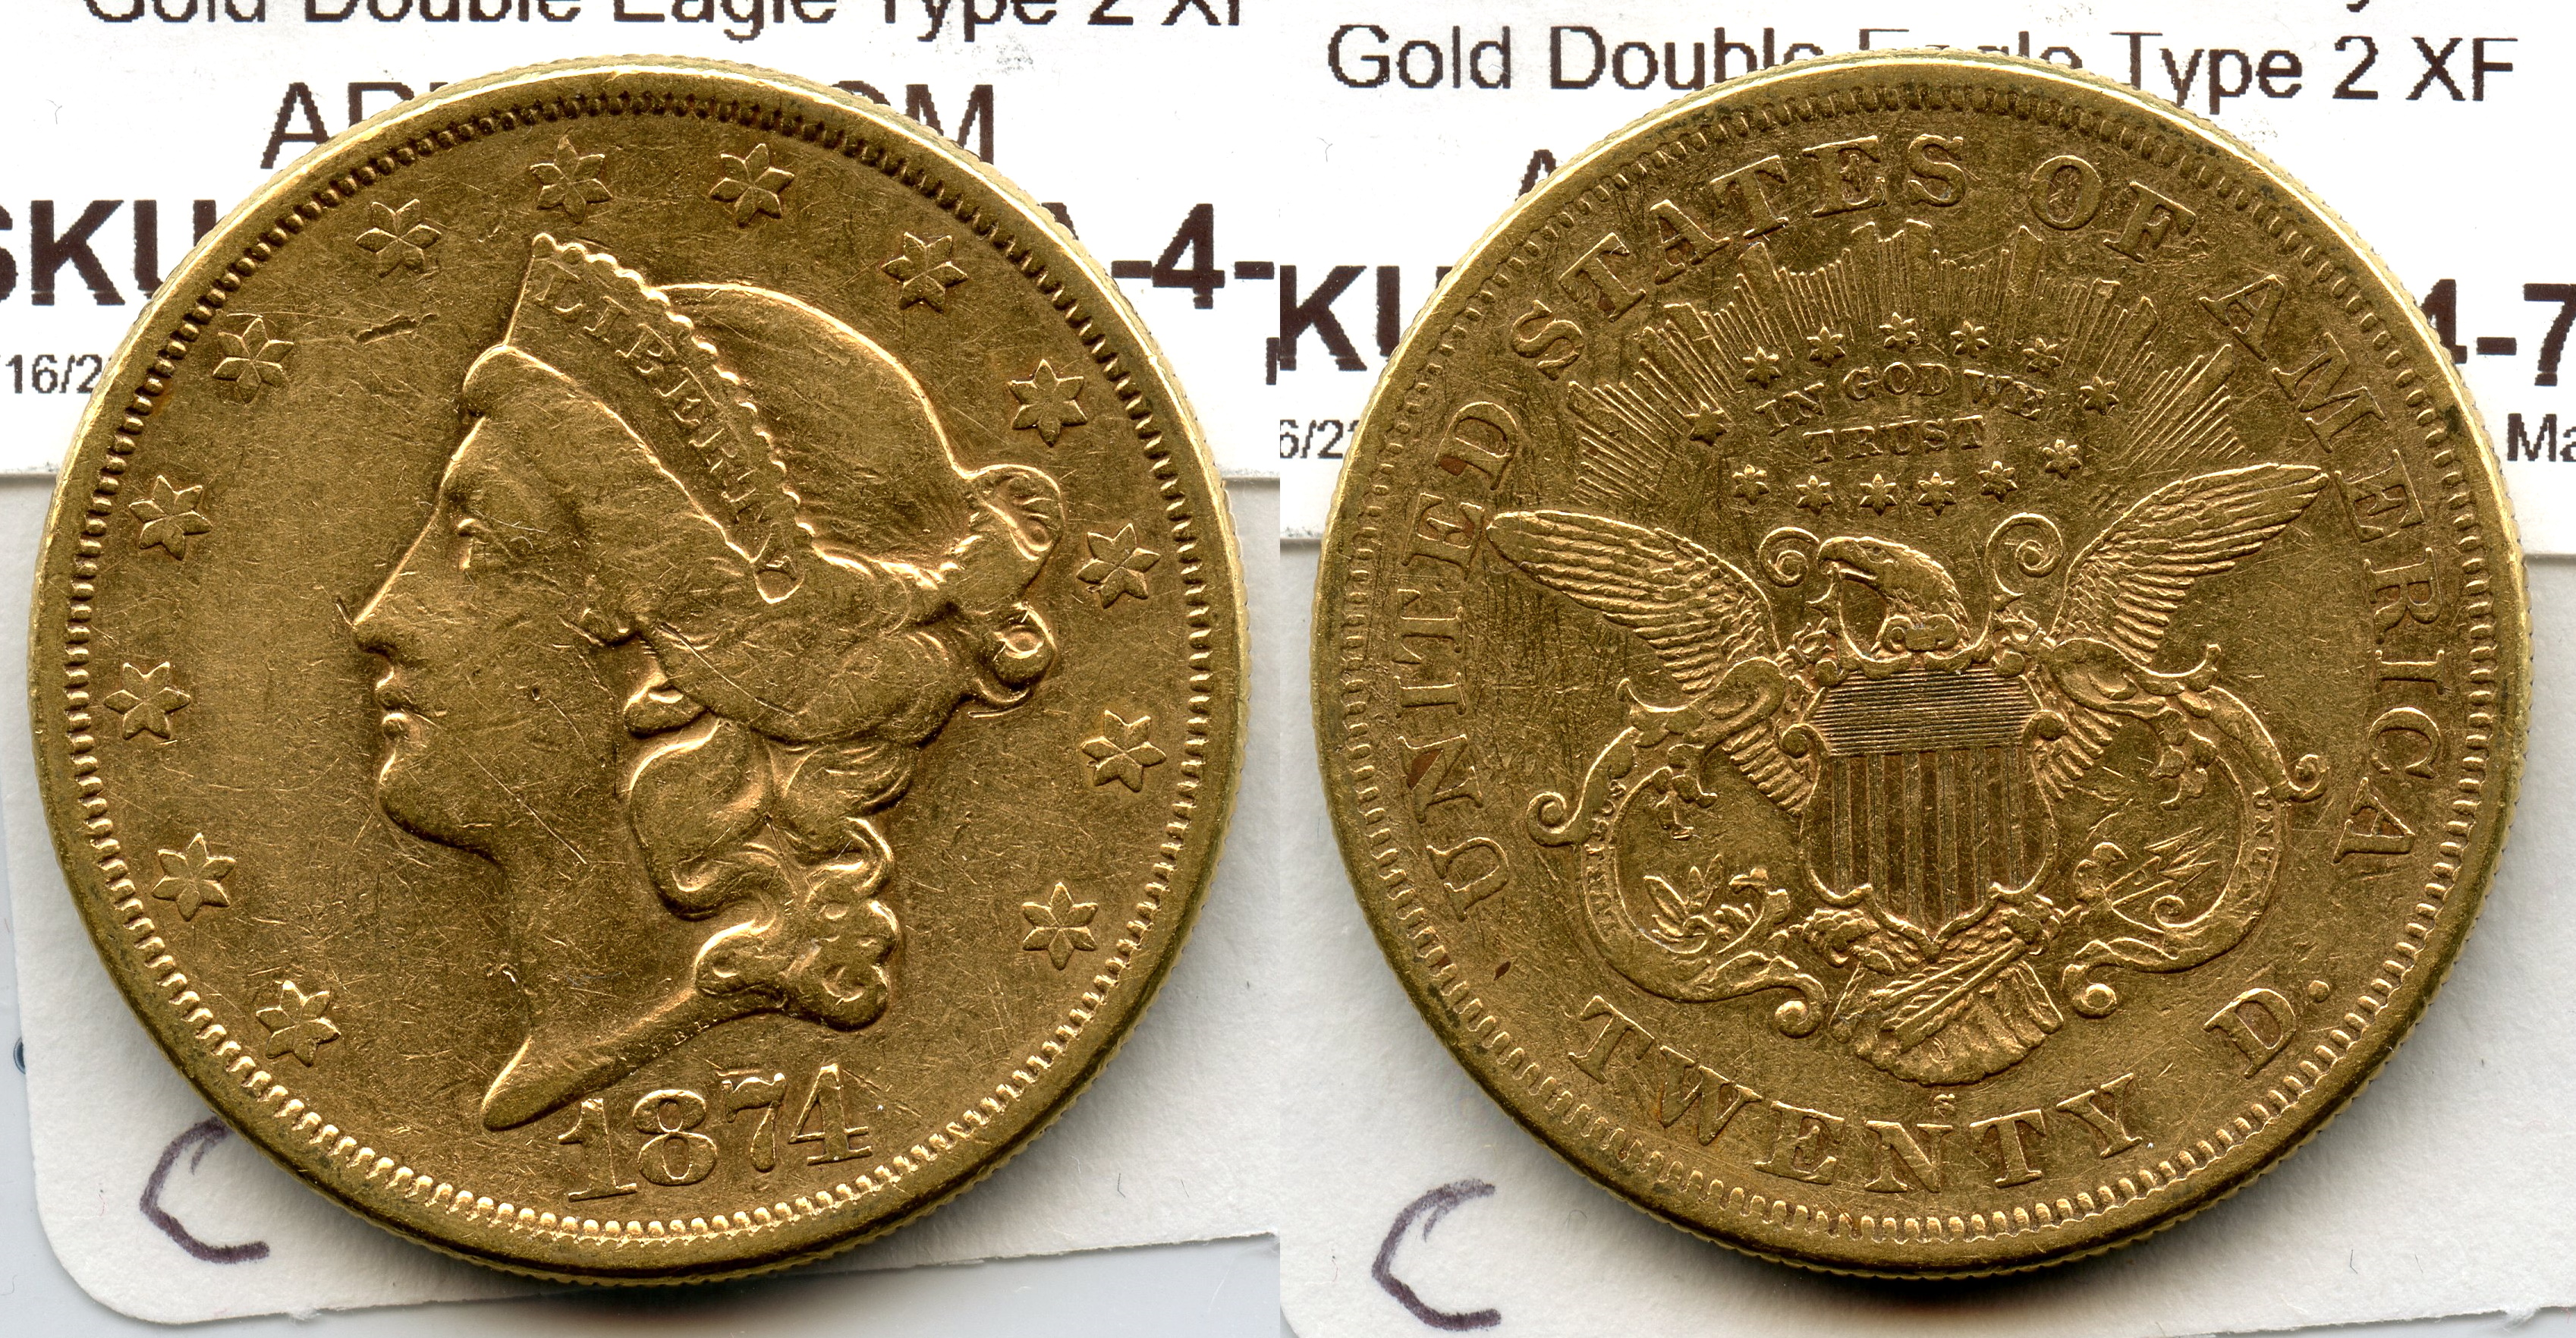 1874-S Liberty Head $20.00 Gold Double Eagle EF-40 #c large